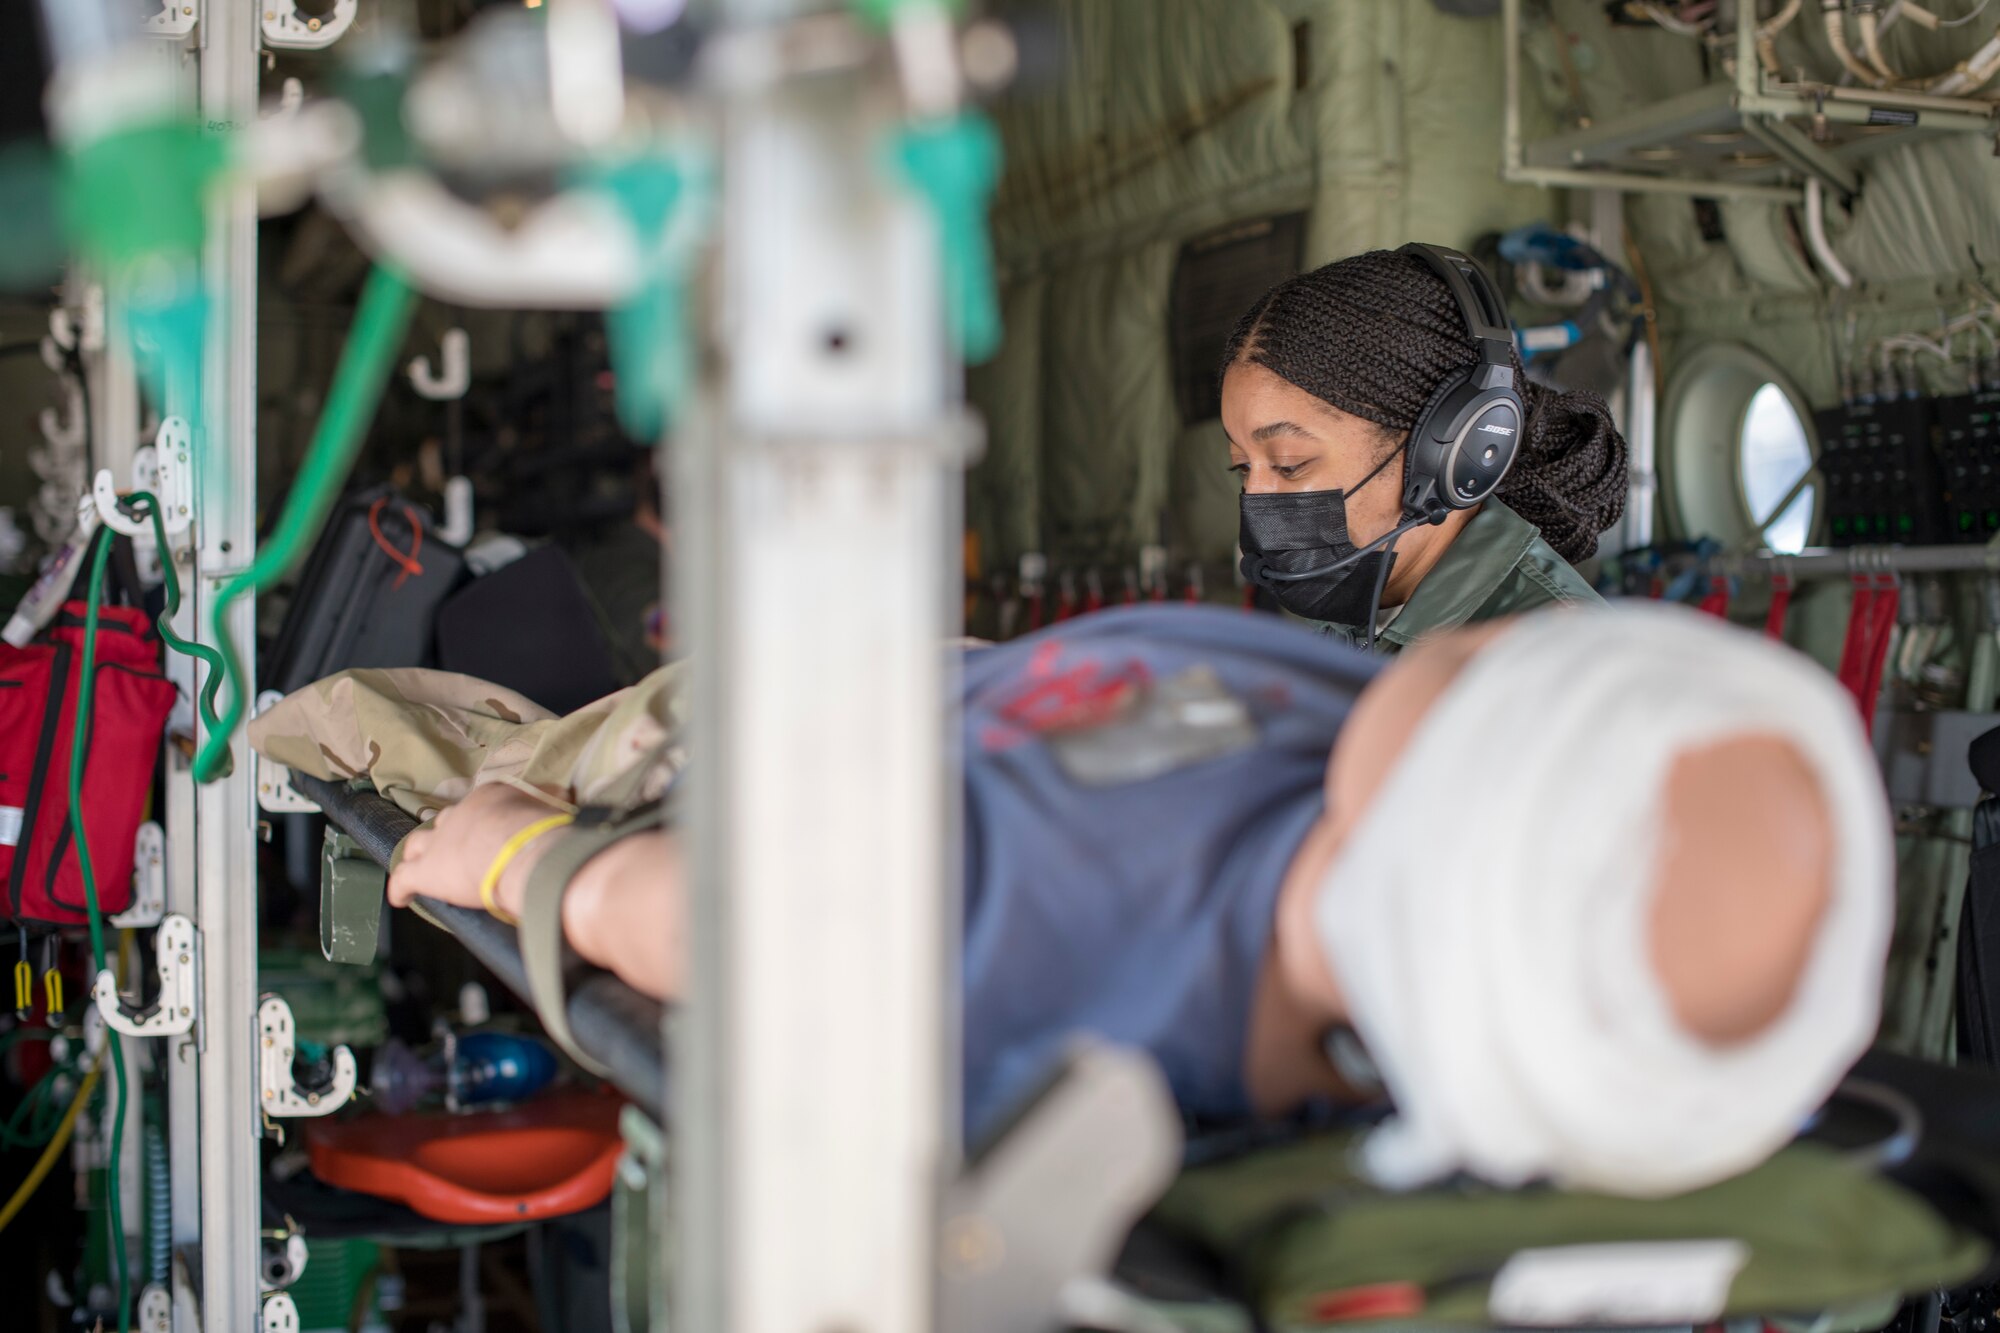 Capt. Toya Williams, 36th Aeromedical Evacuation flight nurse, tends to a patient as part of her pre-deployment training at Keesler Air Force Base, Miss., Jan. 13, 2016. Williams will deploy to Ramstein Air Base, Germany where she will be a part of the 10th Expeditionary Aeromedical Evacuation Flight. (U.S. Air Force photo by Senior Airman Kristen Pittman)